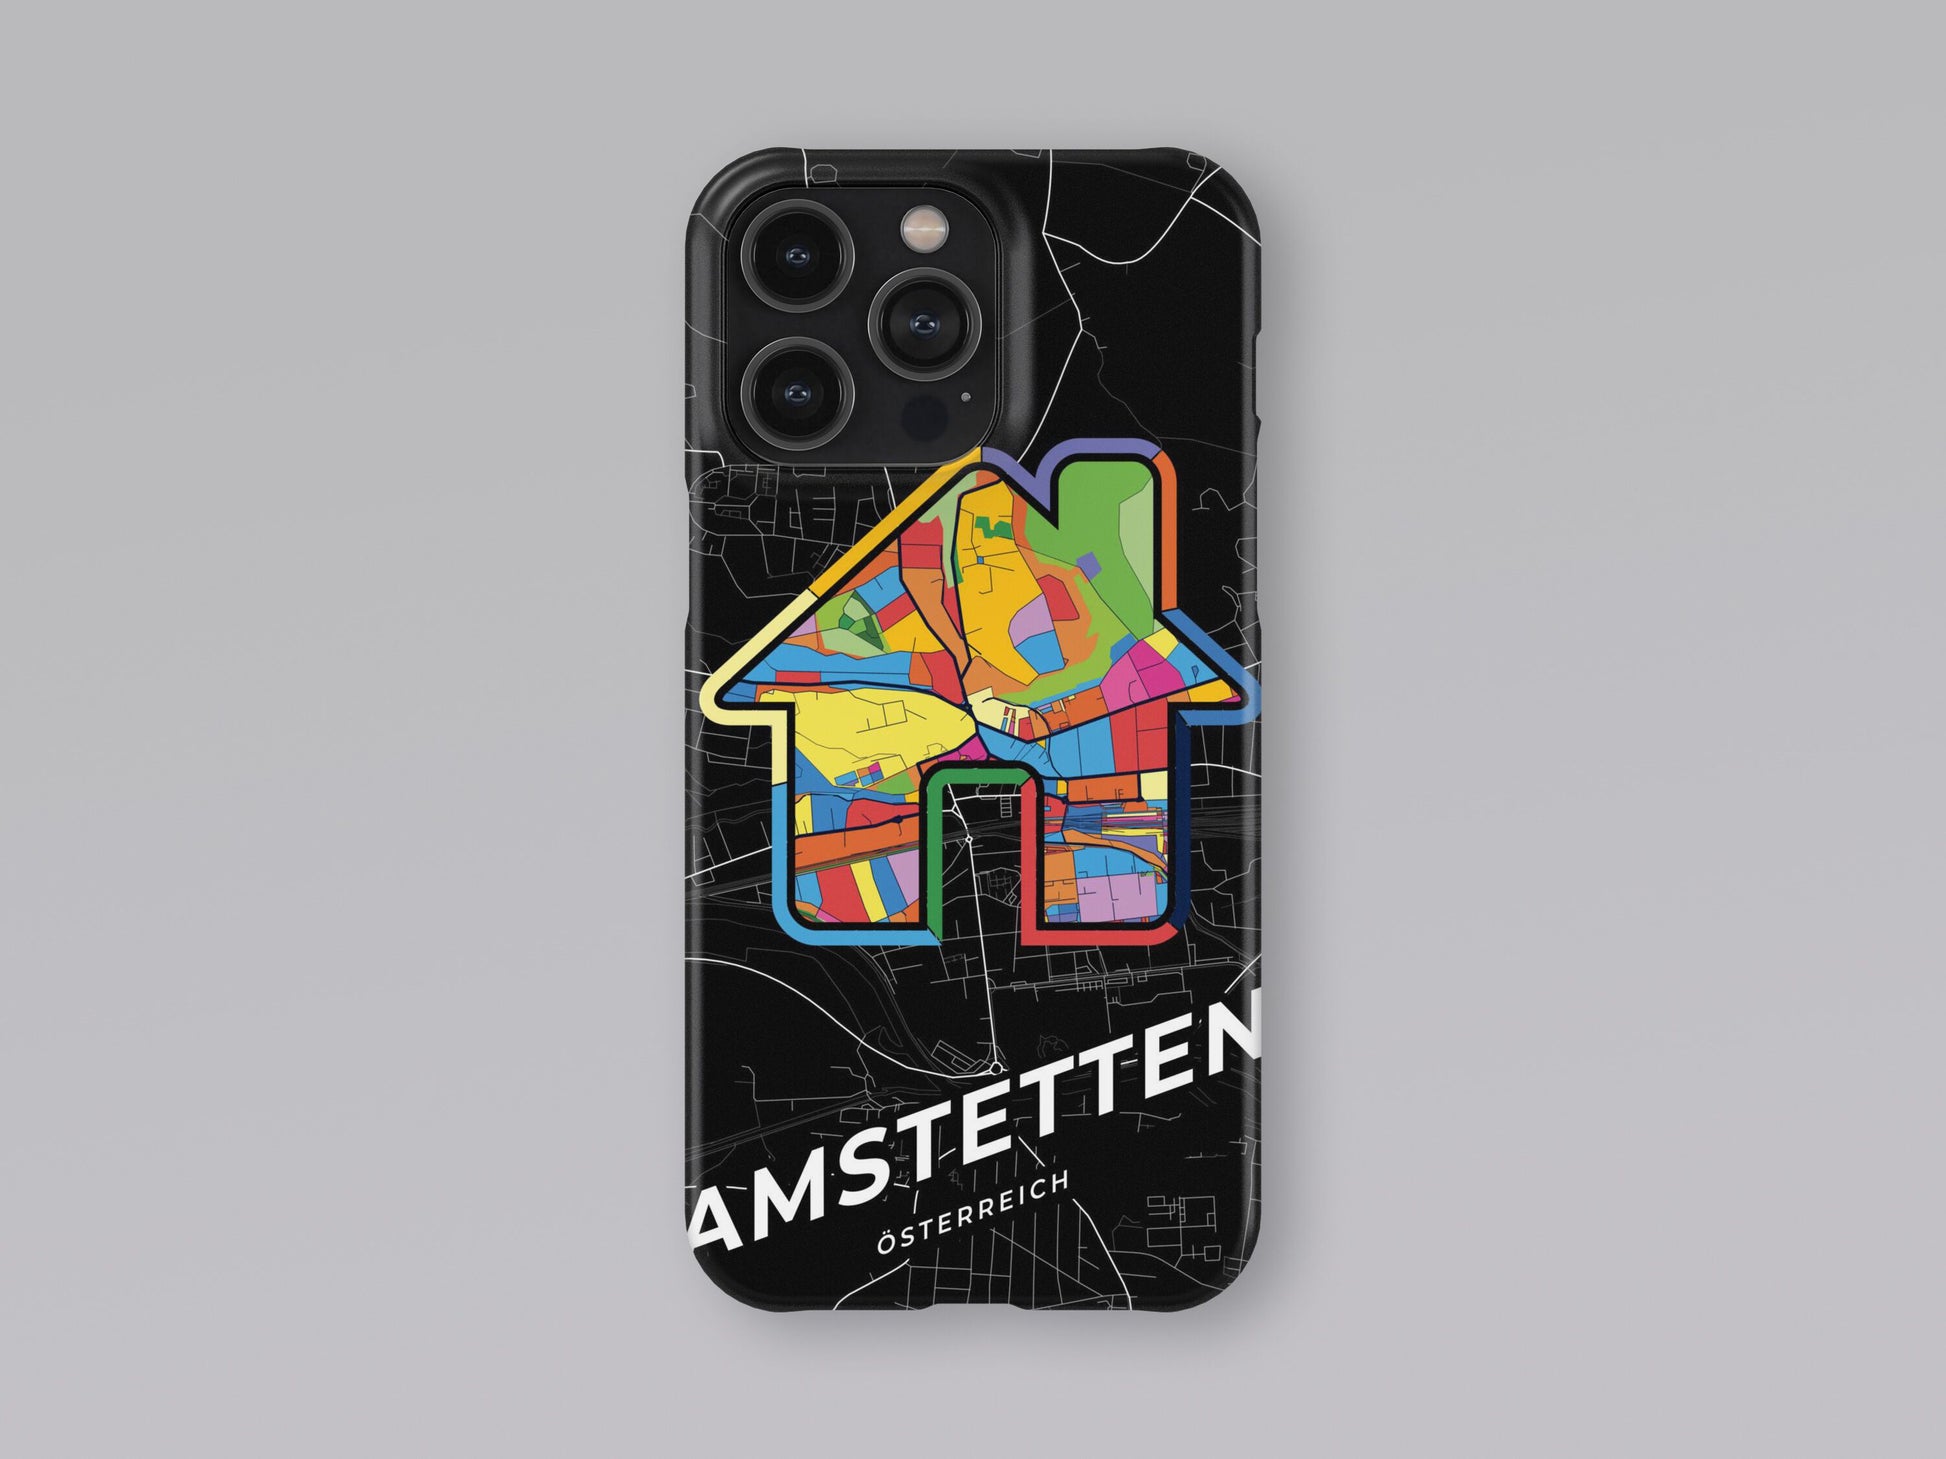 Amstetten Österreich slim phone case with colorful icon. Birthday, wedding or housewarming gift. Couple match cases. 3